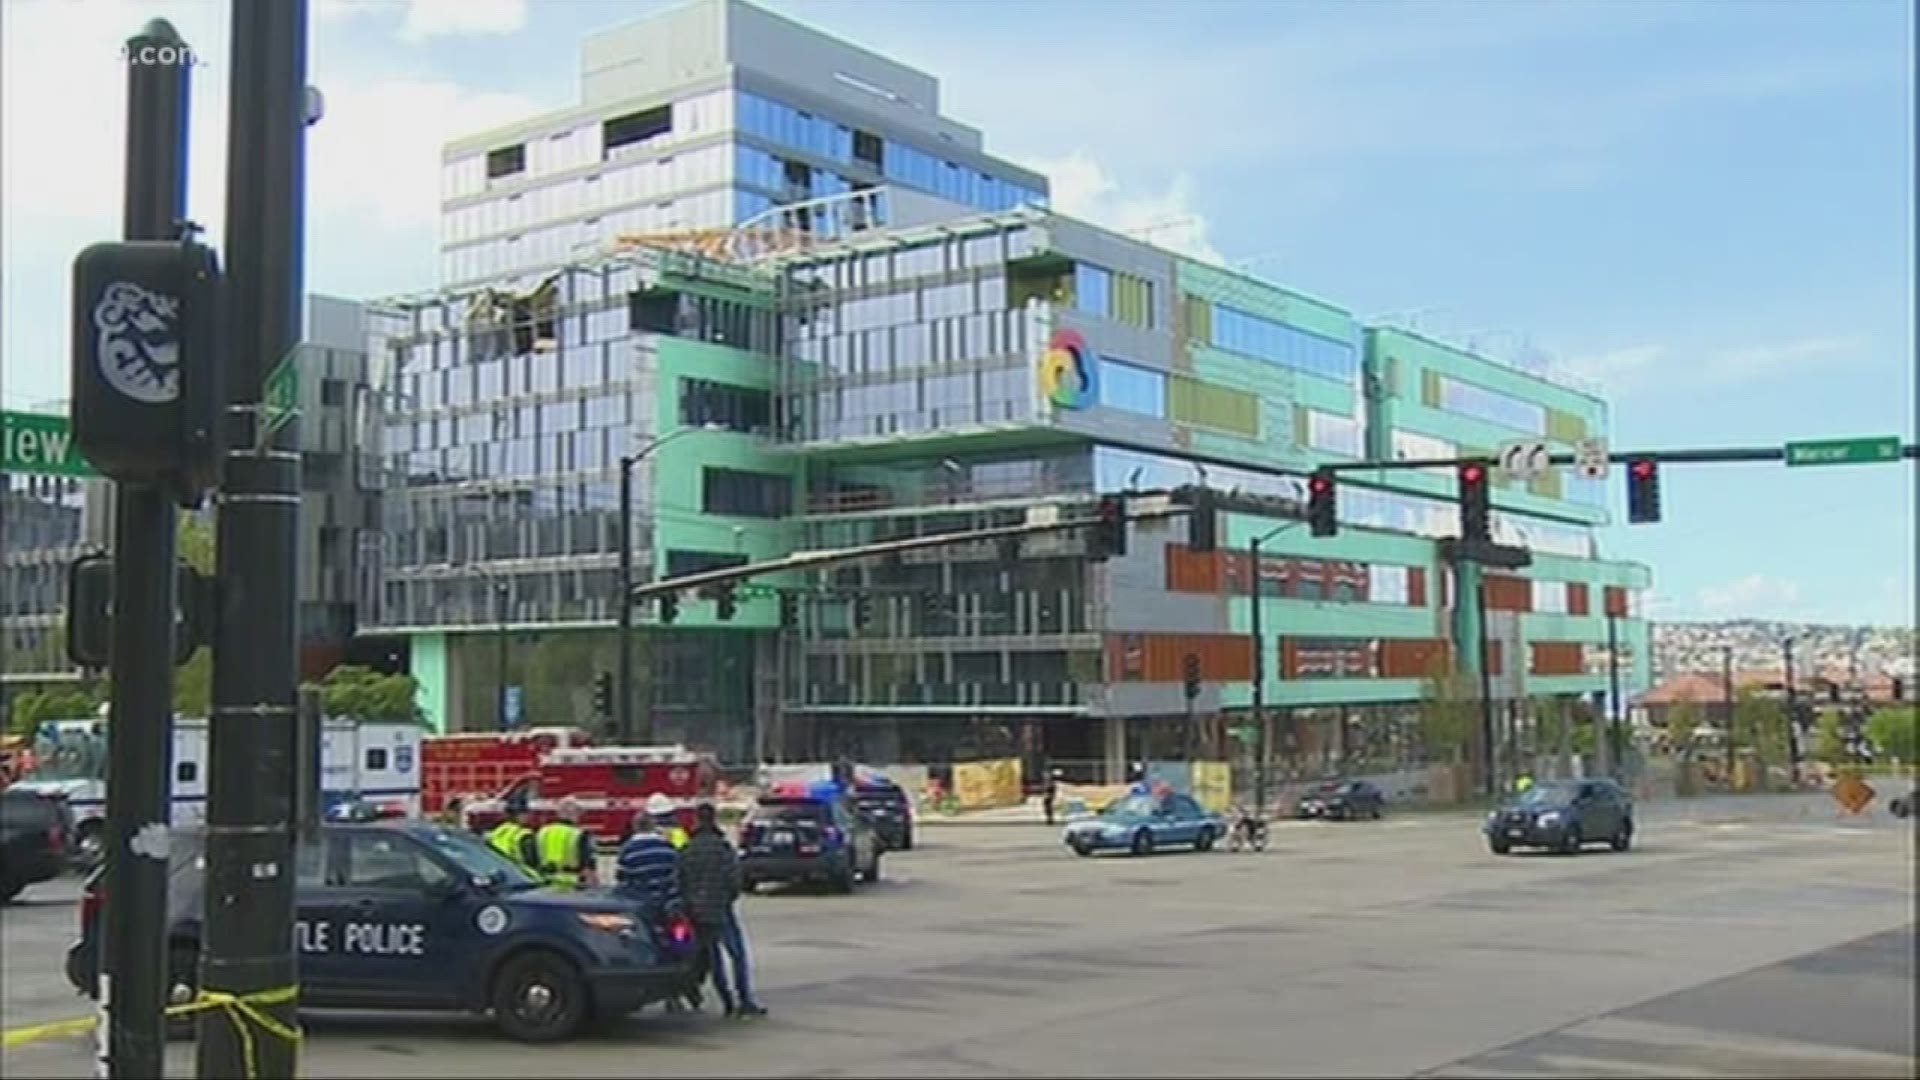 The crane was atop an office building under construction when it collapsed, pinning six cars underneath.